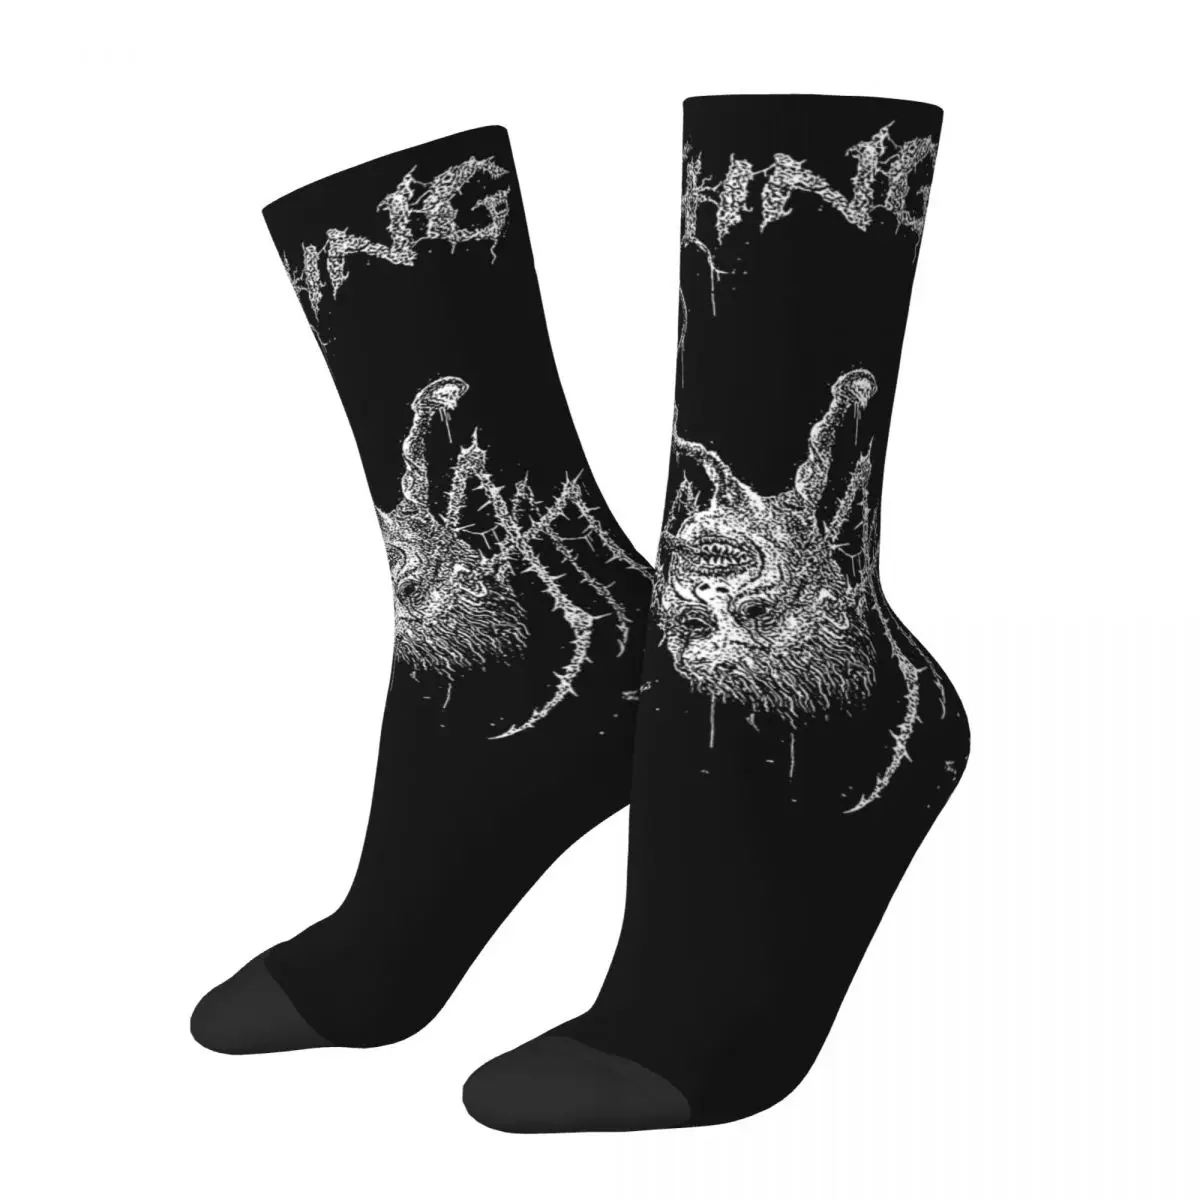 

The Thing Cult Horror Movie Design Theme Dress Socks Product for Women Men Compression Stockings